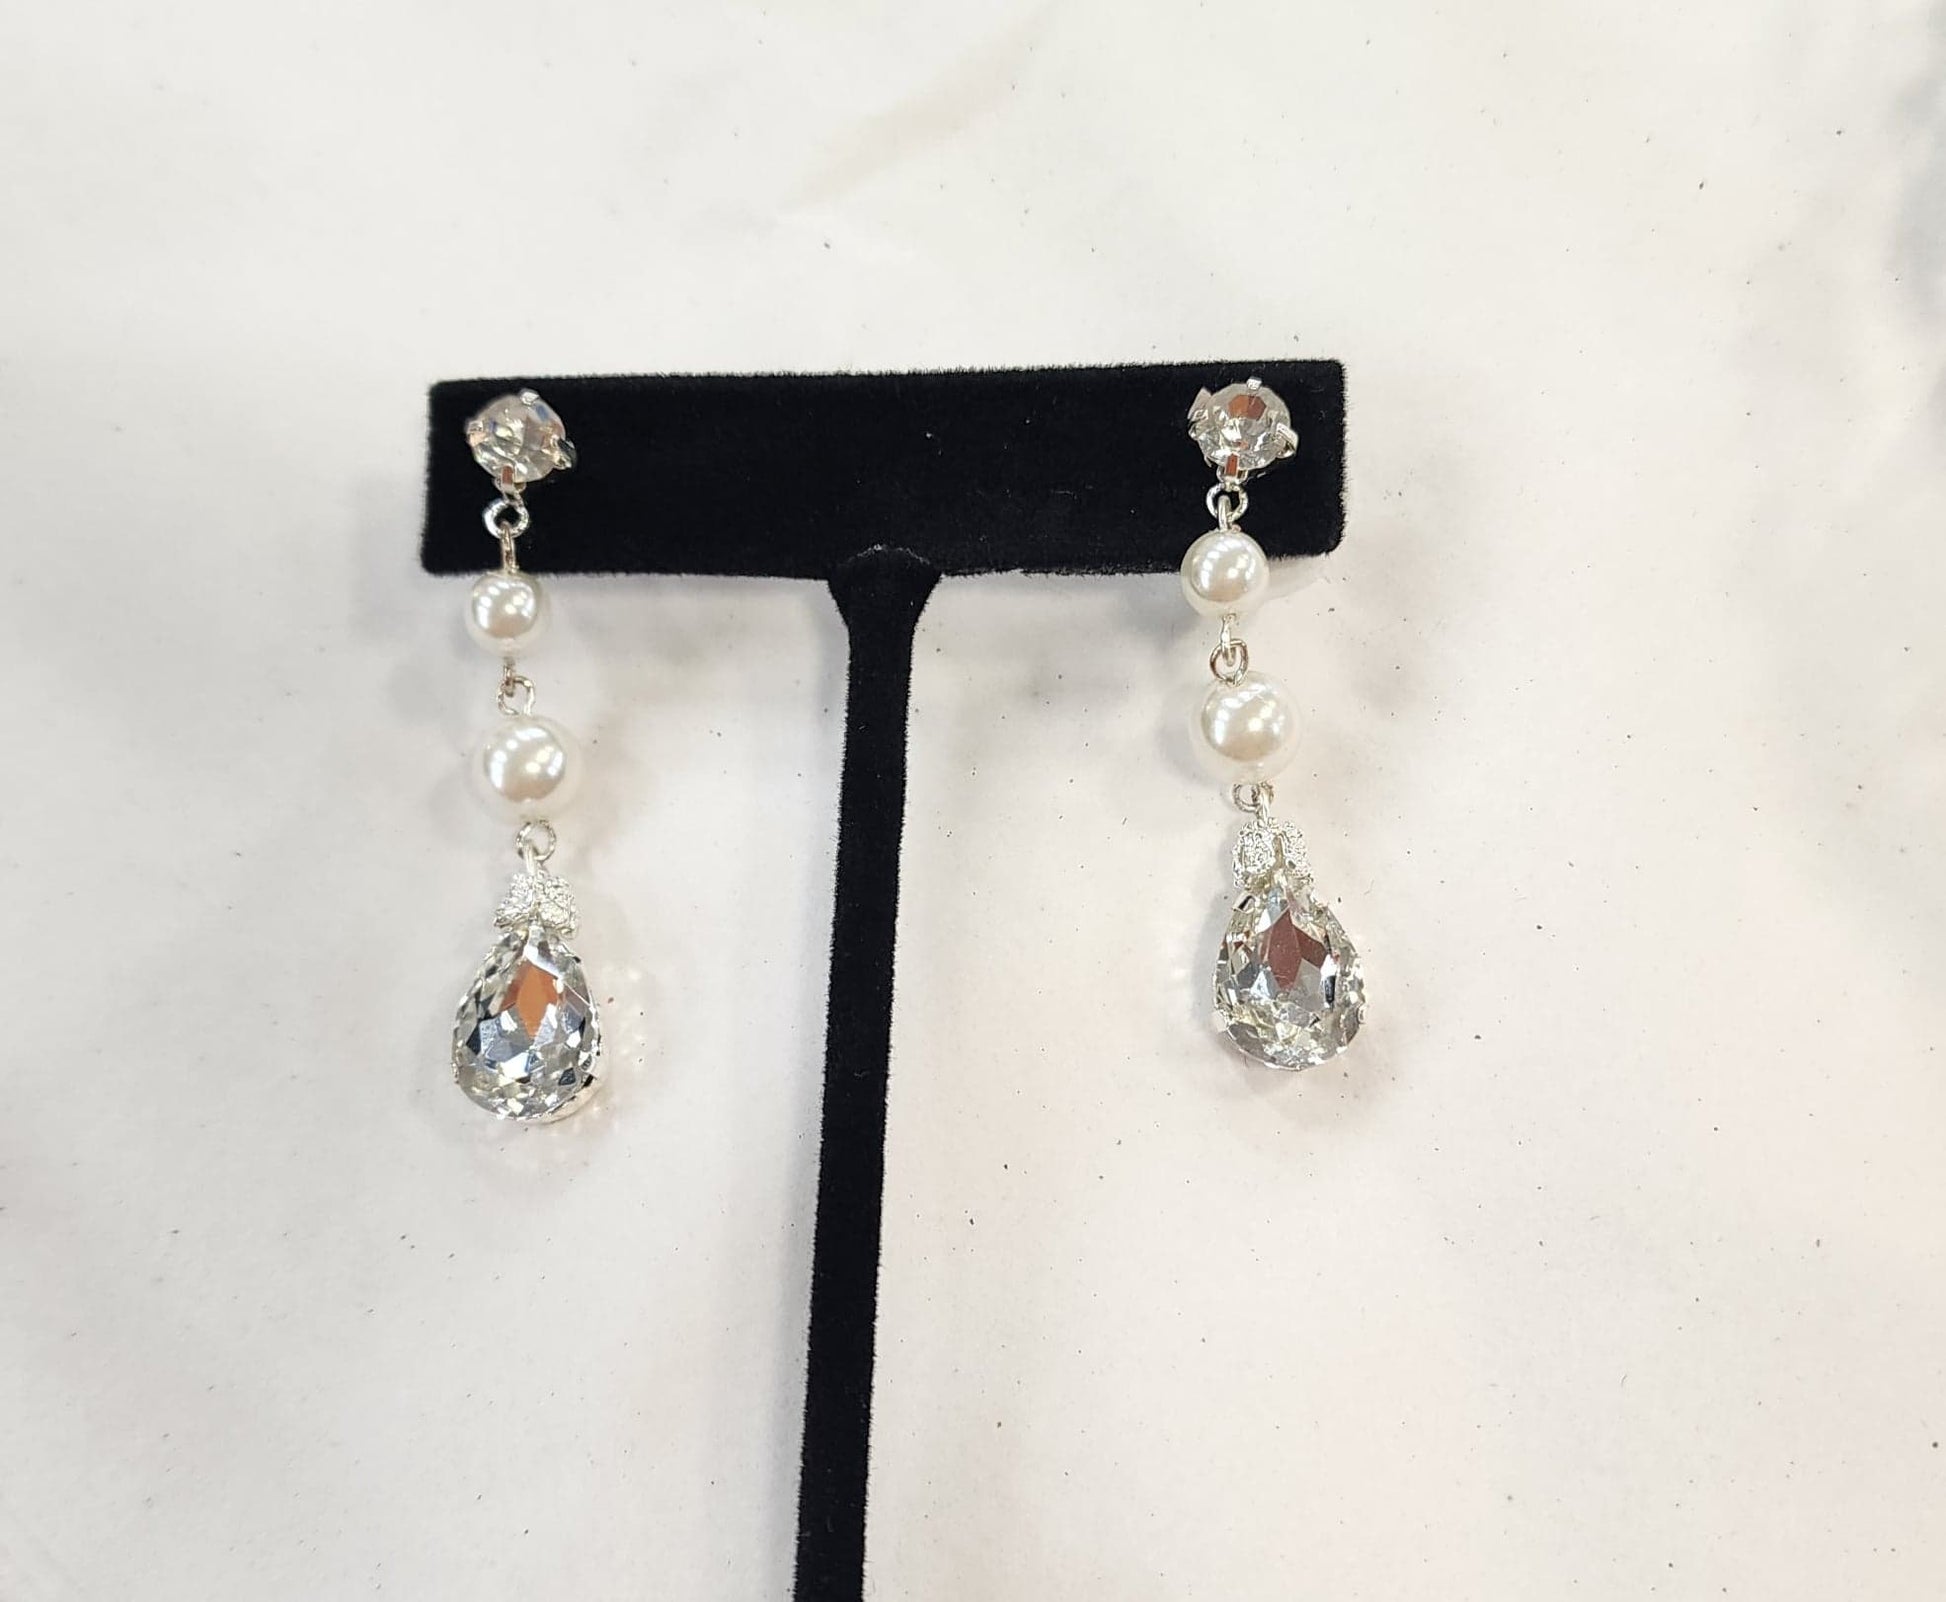 Pearl drop crystal earrings Lustrous, hanging double pearl drops and pear-cut rhinestones glimmer with delicate, glamorous detail! Perfect as a light embellishment for a wedding in any season. 